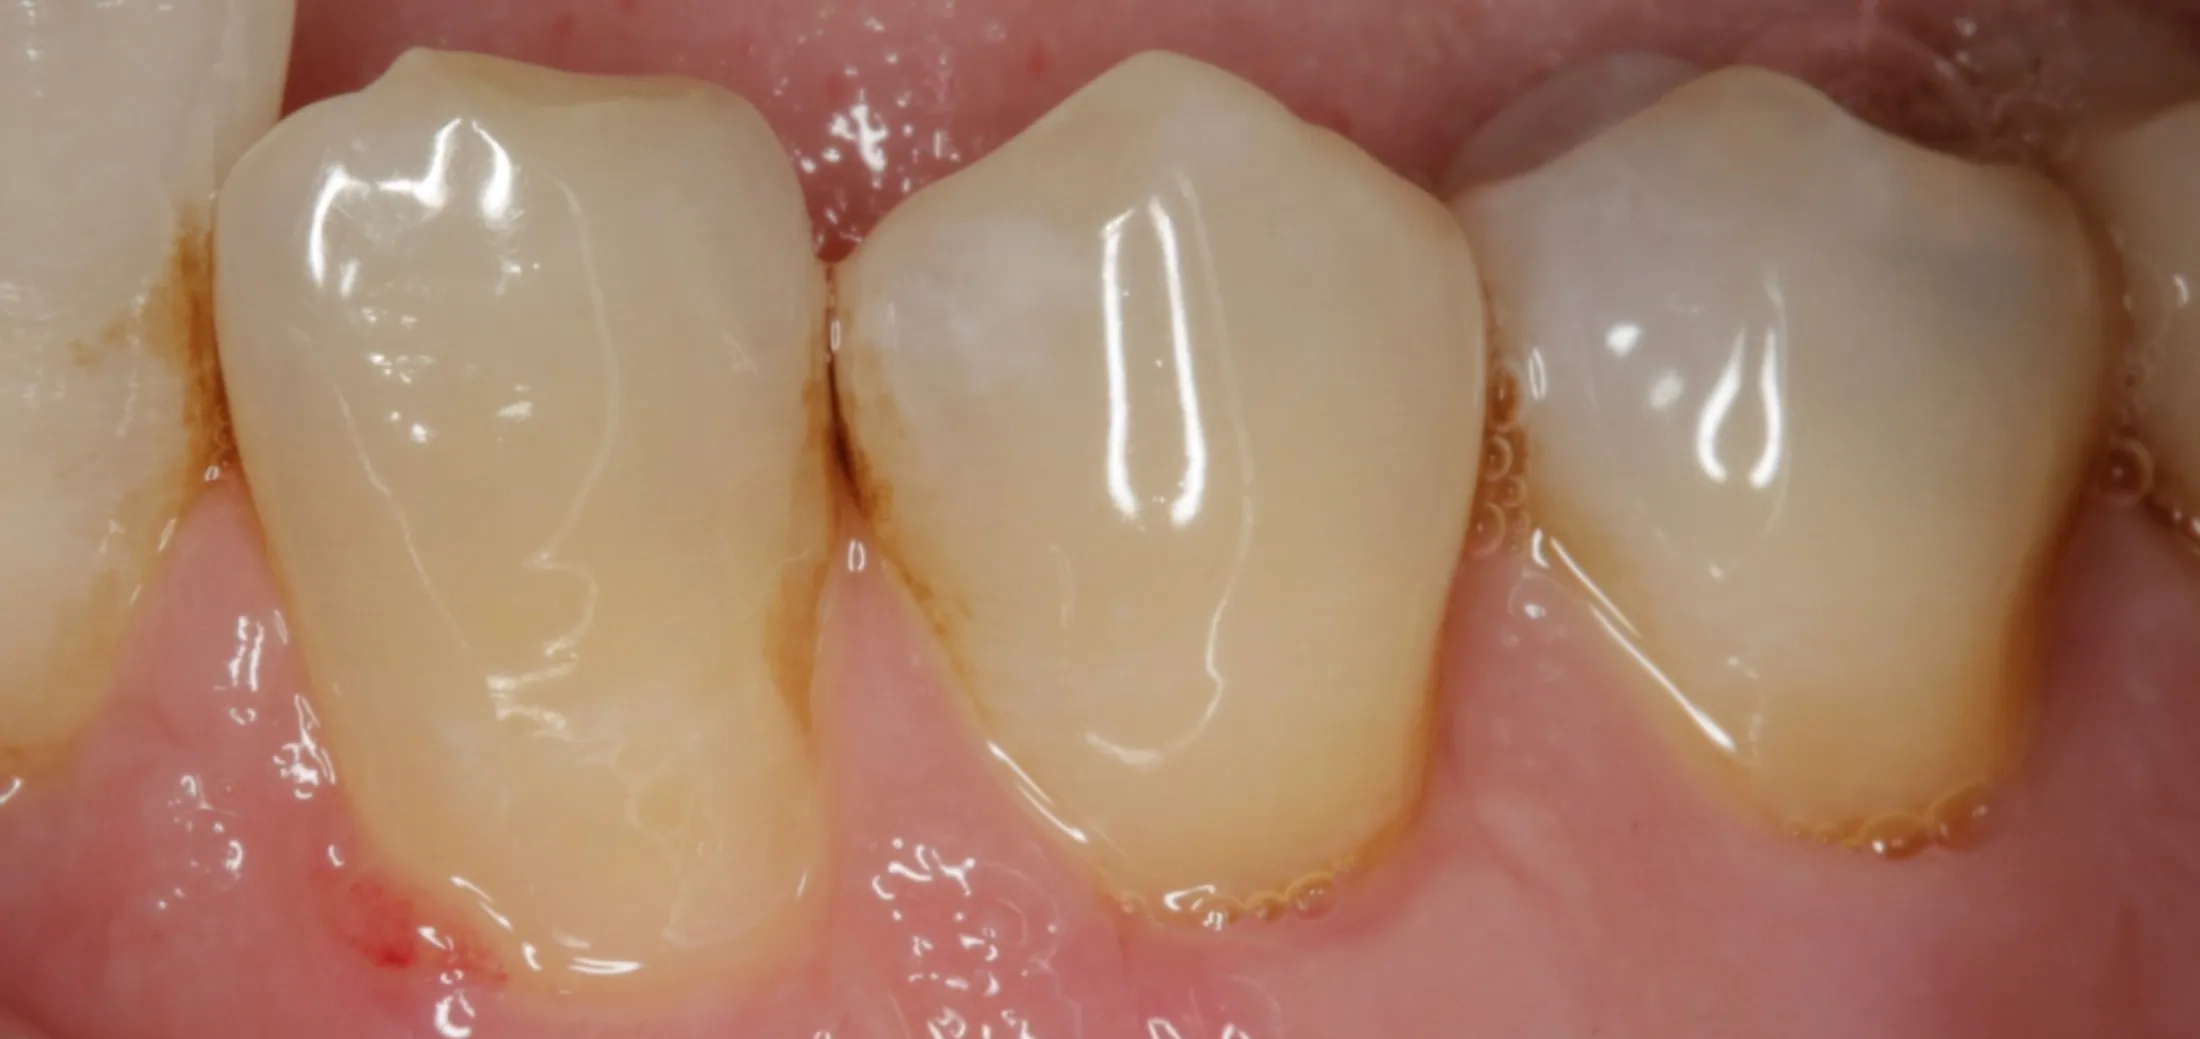 Close-up view of restored gum health following grafting treatment.